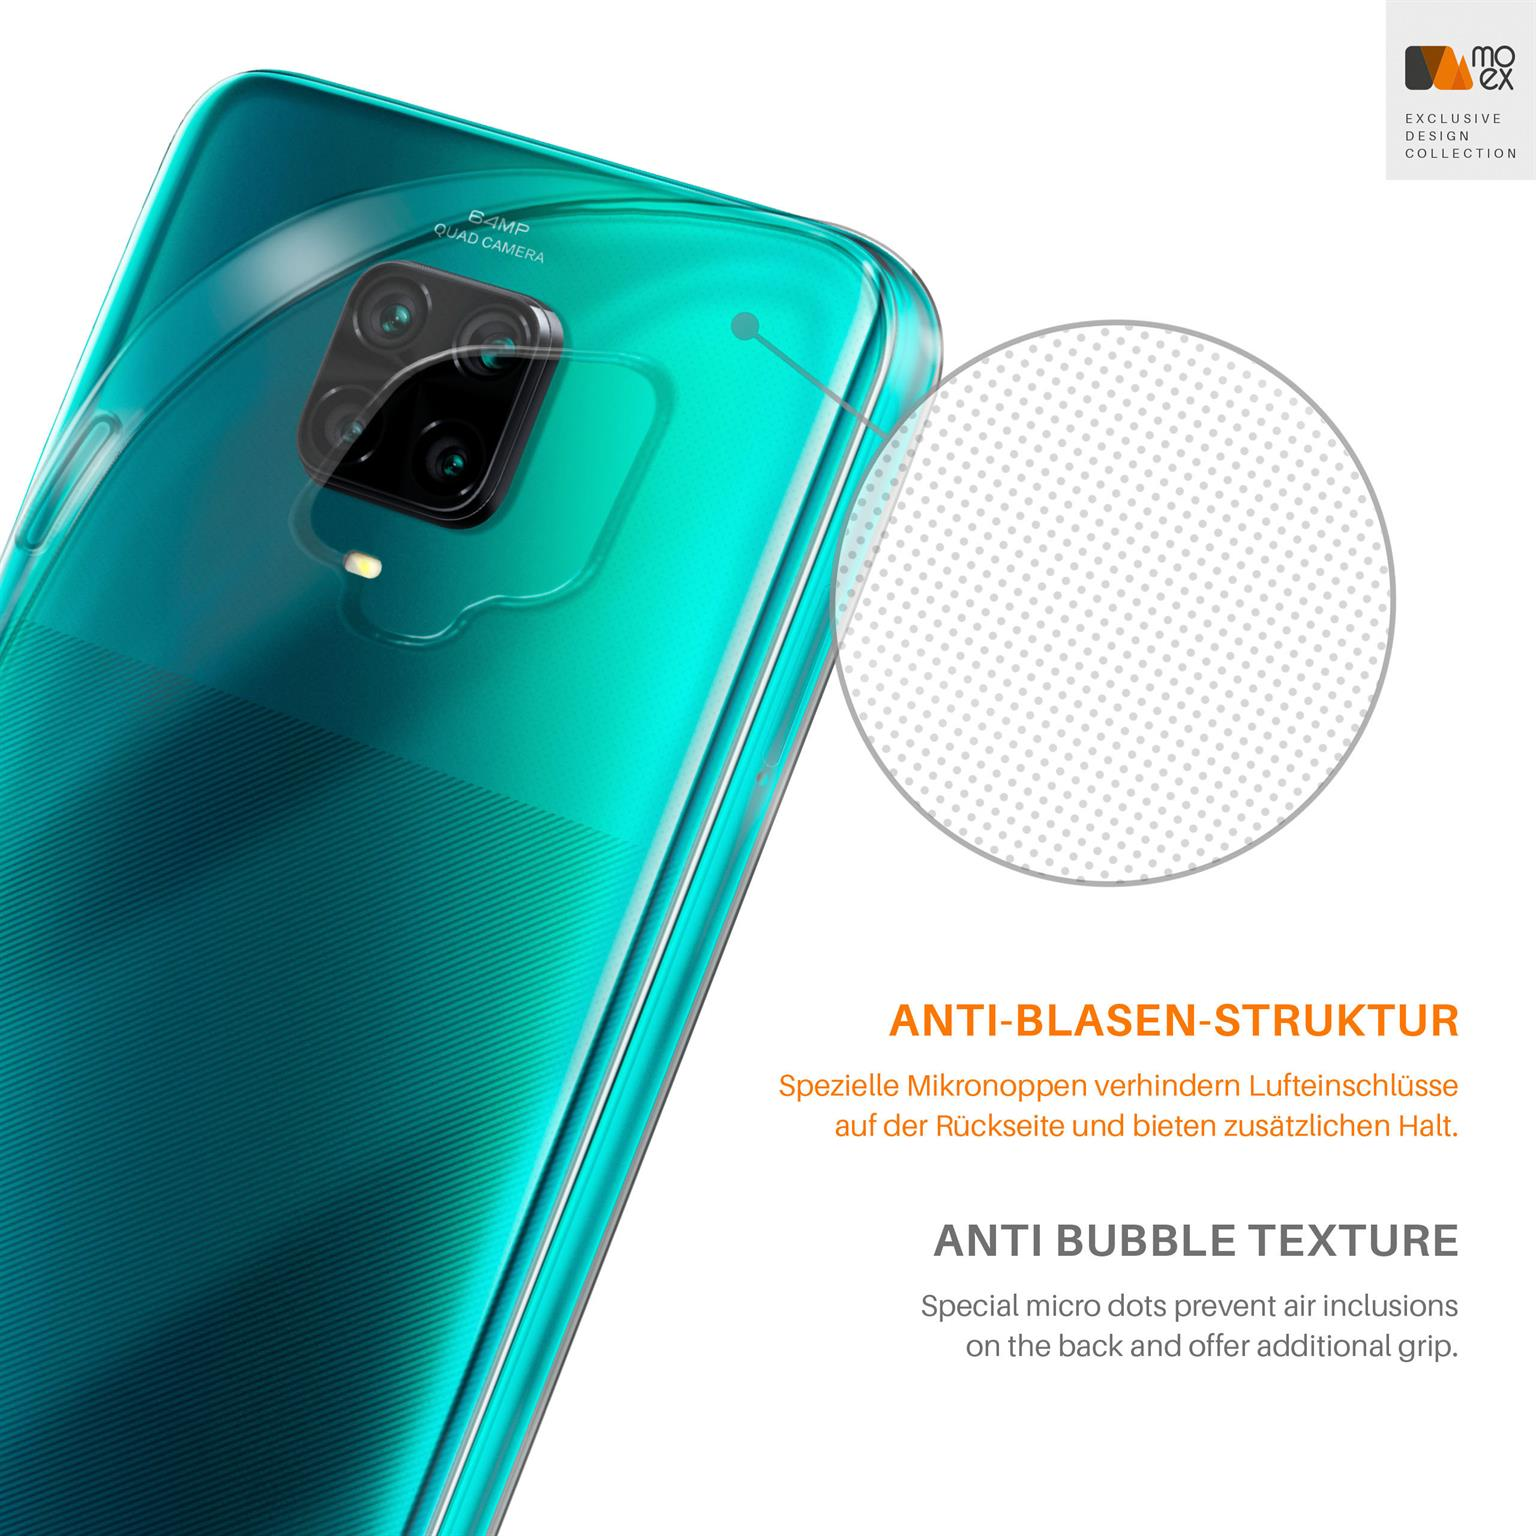 Backcover, MOEX Xiaomi, Redmi Aero Case, 9 Crystal-Clear Pro, Note